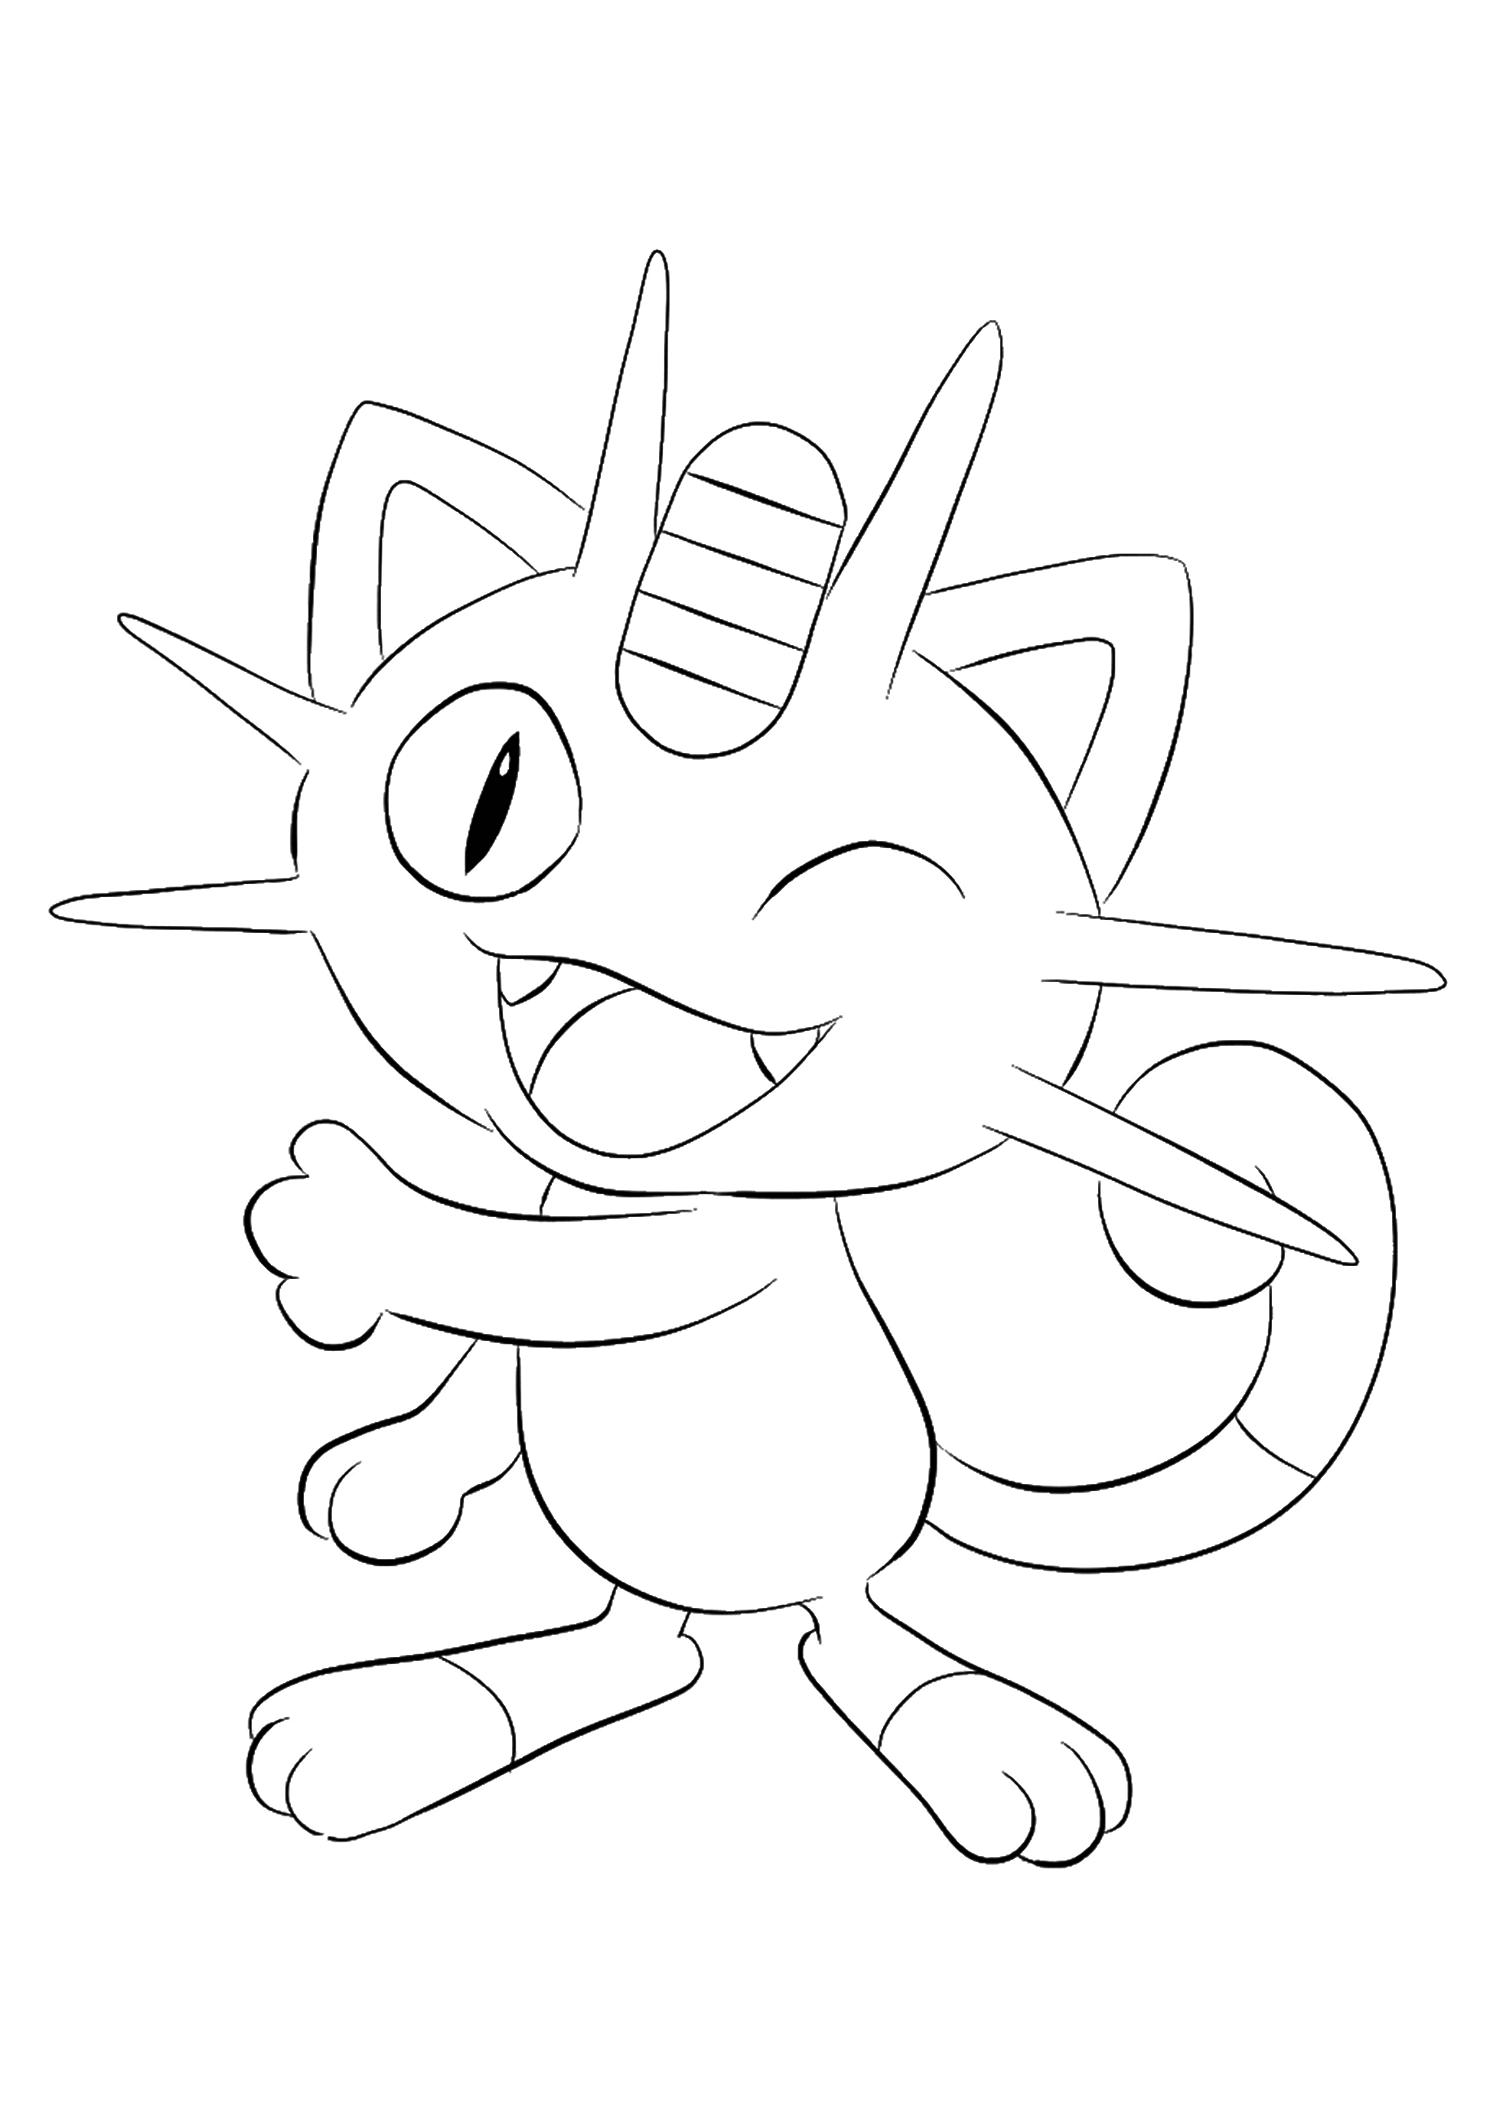 Meowth No.52 : Pokemon Generation I - All Pokemon coloring pages Kids